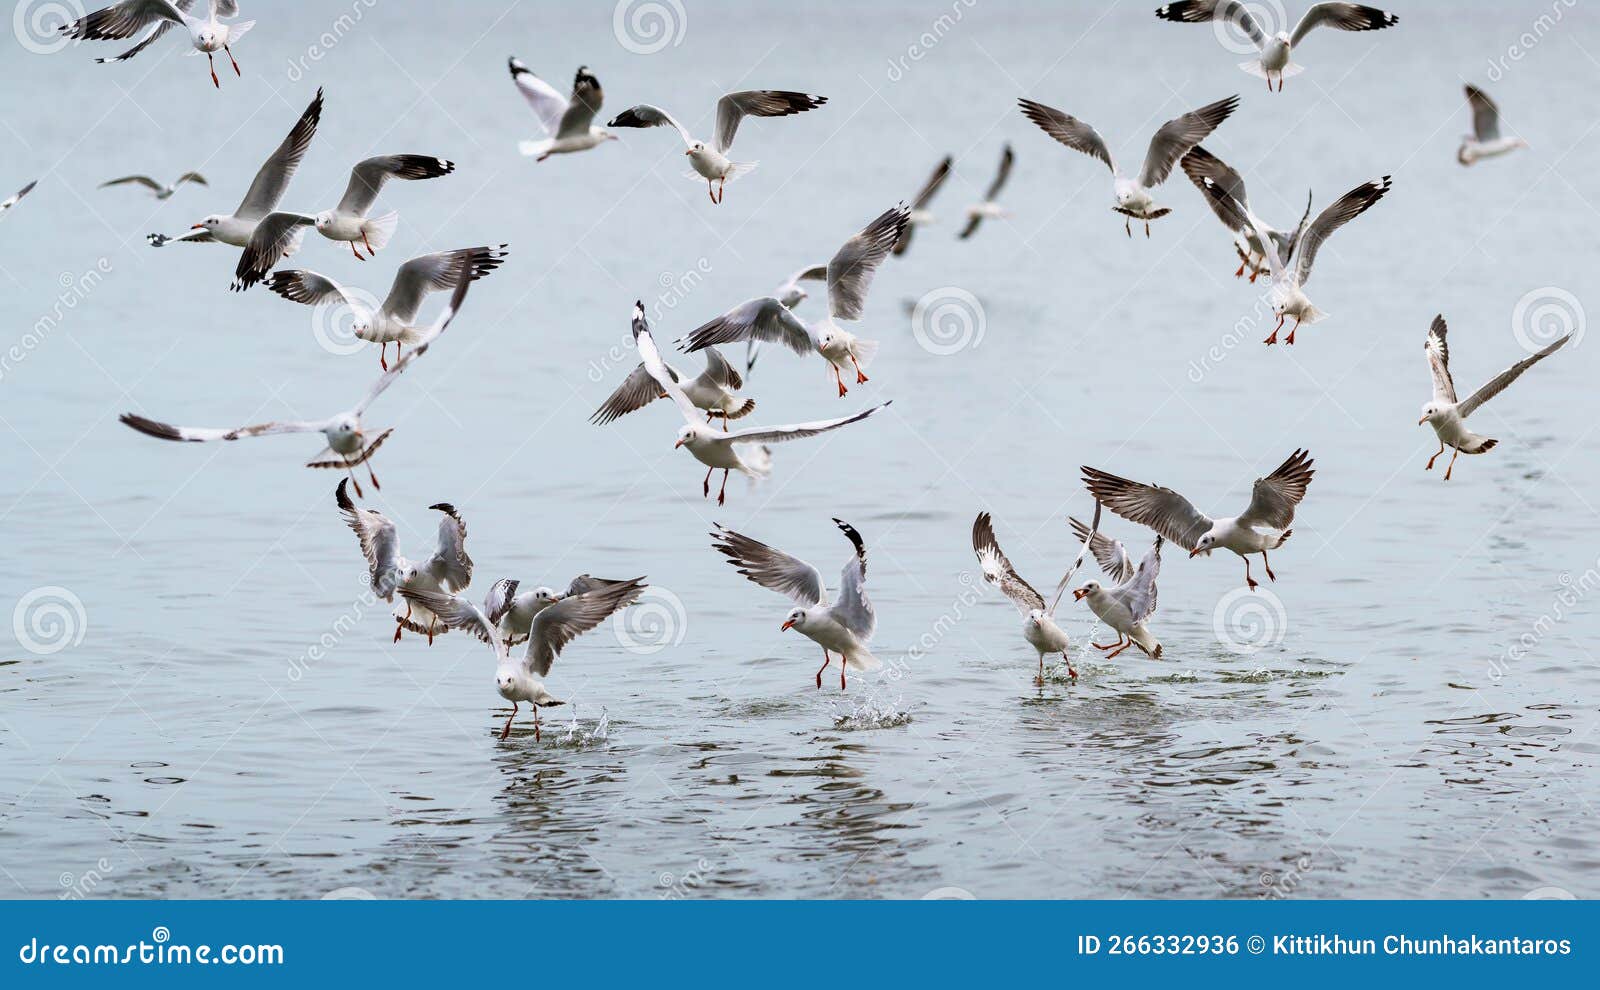 wildlife, background and texture of larus charadriiformes or white seagull on a sea, flies over the water. flock of birds,